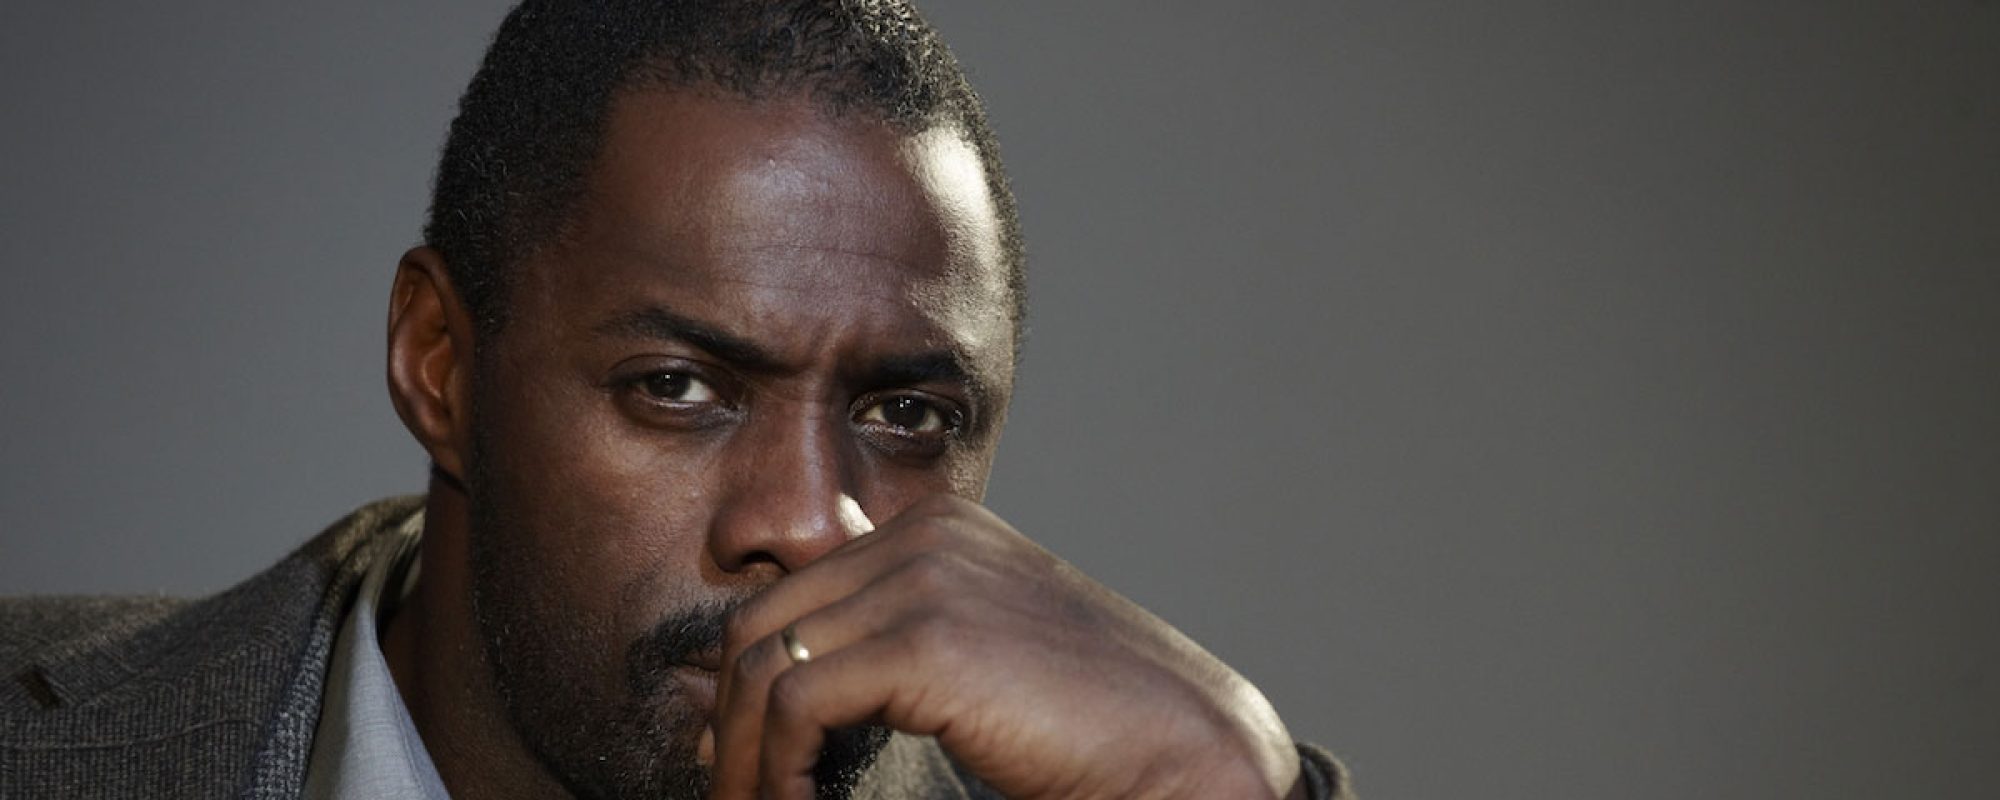 IDRIS ELBA, STEVEN MACKINTOSH, AND WARREN BROWN RETURN TO OVATION TV WITH FOUR SEASONS OF LUTHER AIRING ON MONDAY NIGHTS